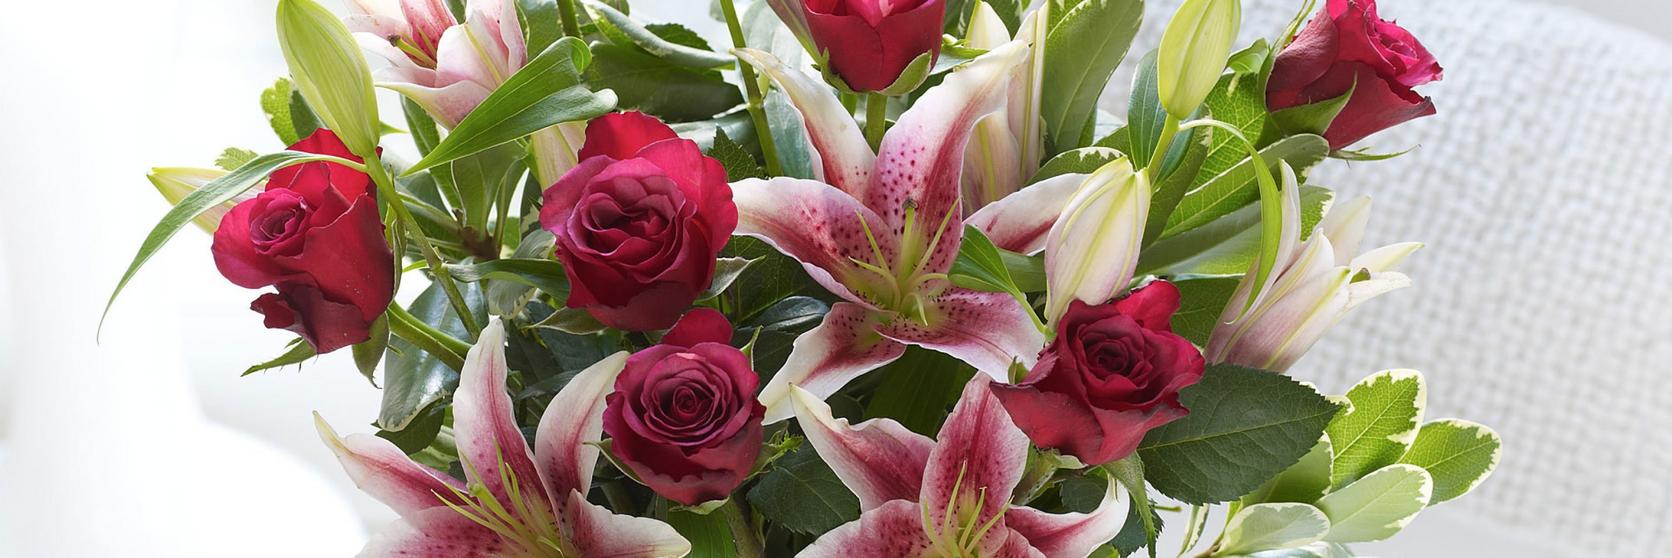 lily-rose-mixed-bouquet-red-pink